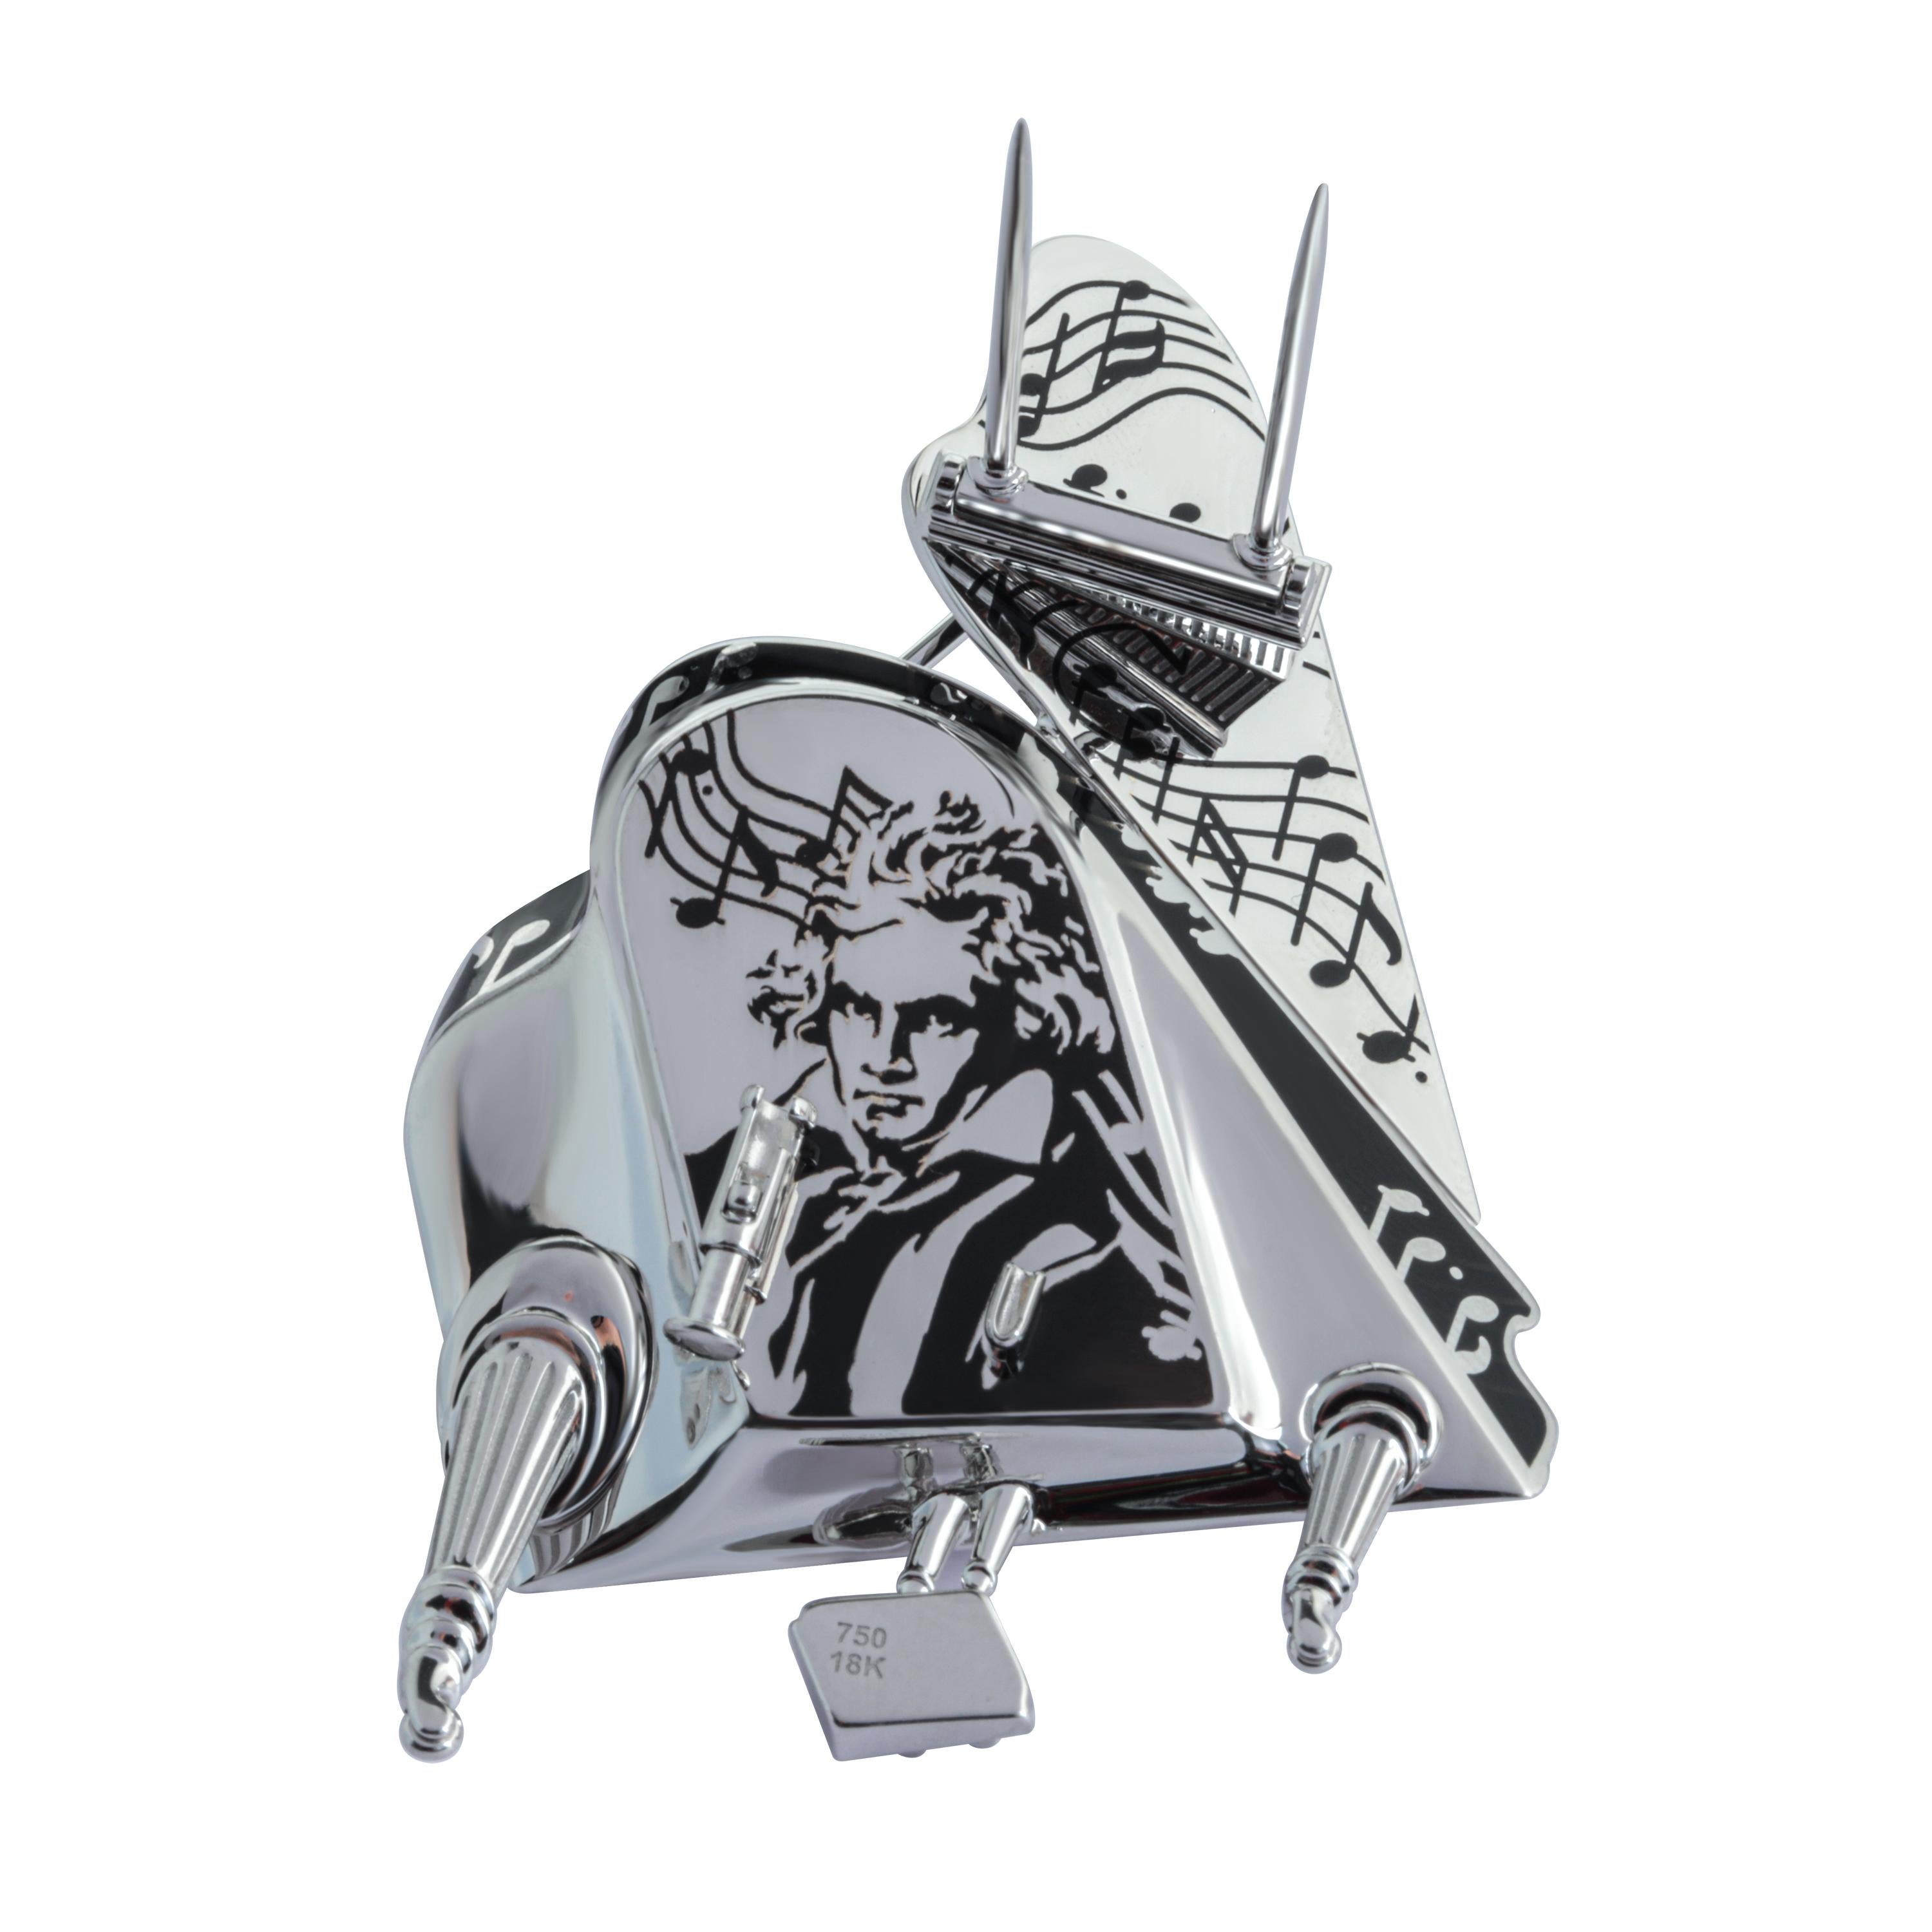 Diamonds Enamel 18 Karat White Gold Piano Brooch
We are introducing Artist collection. The 